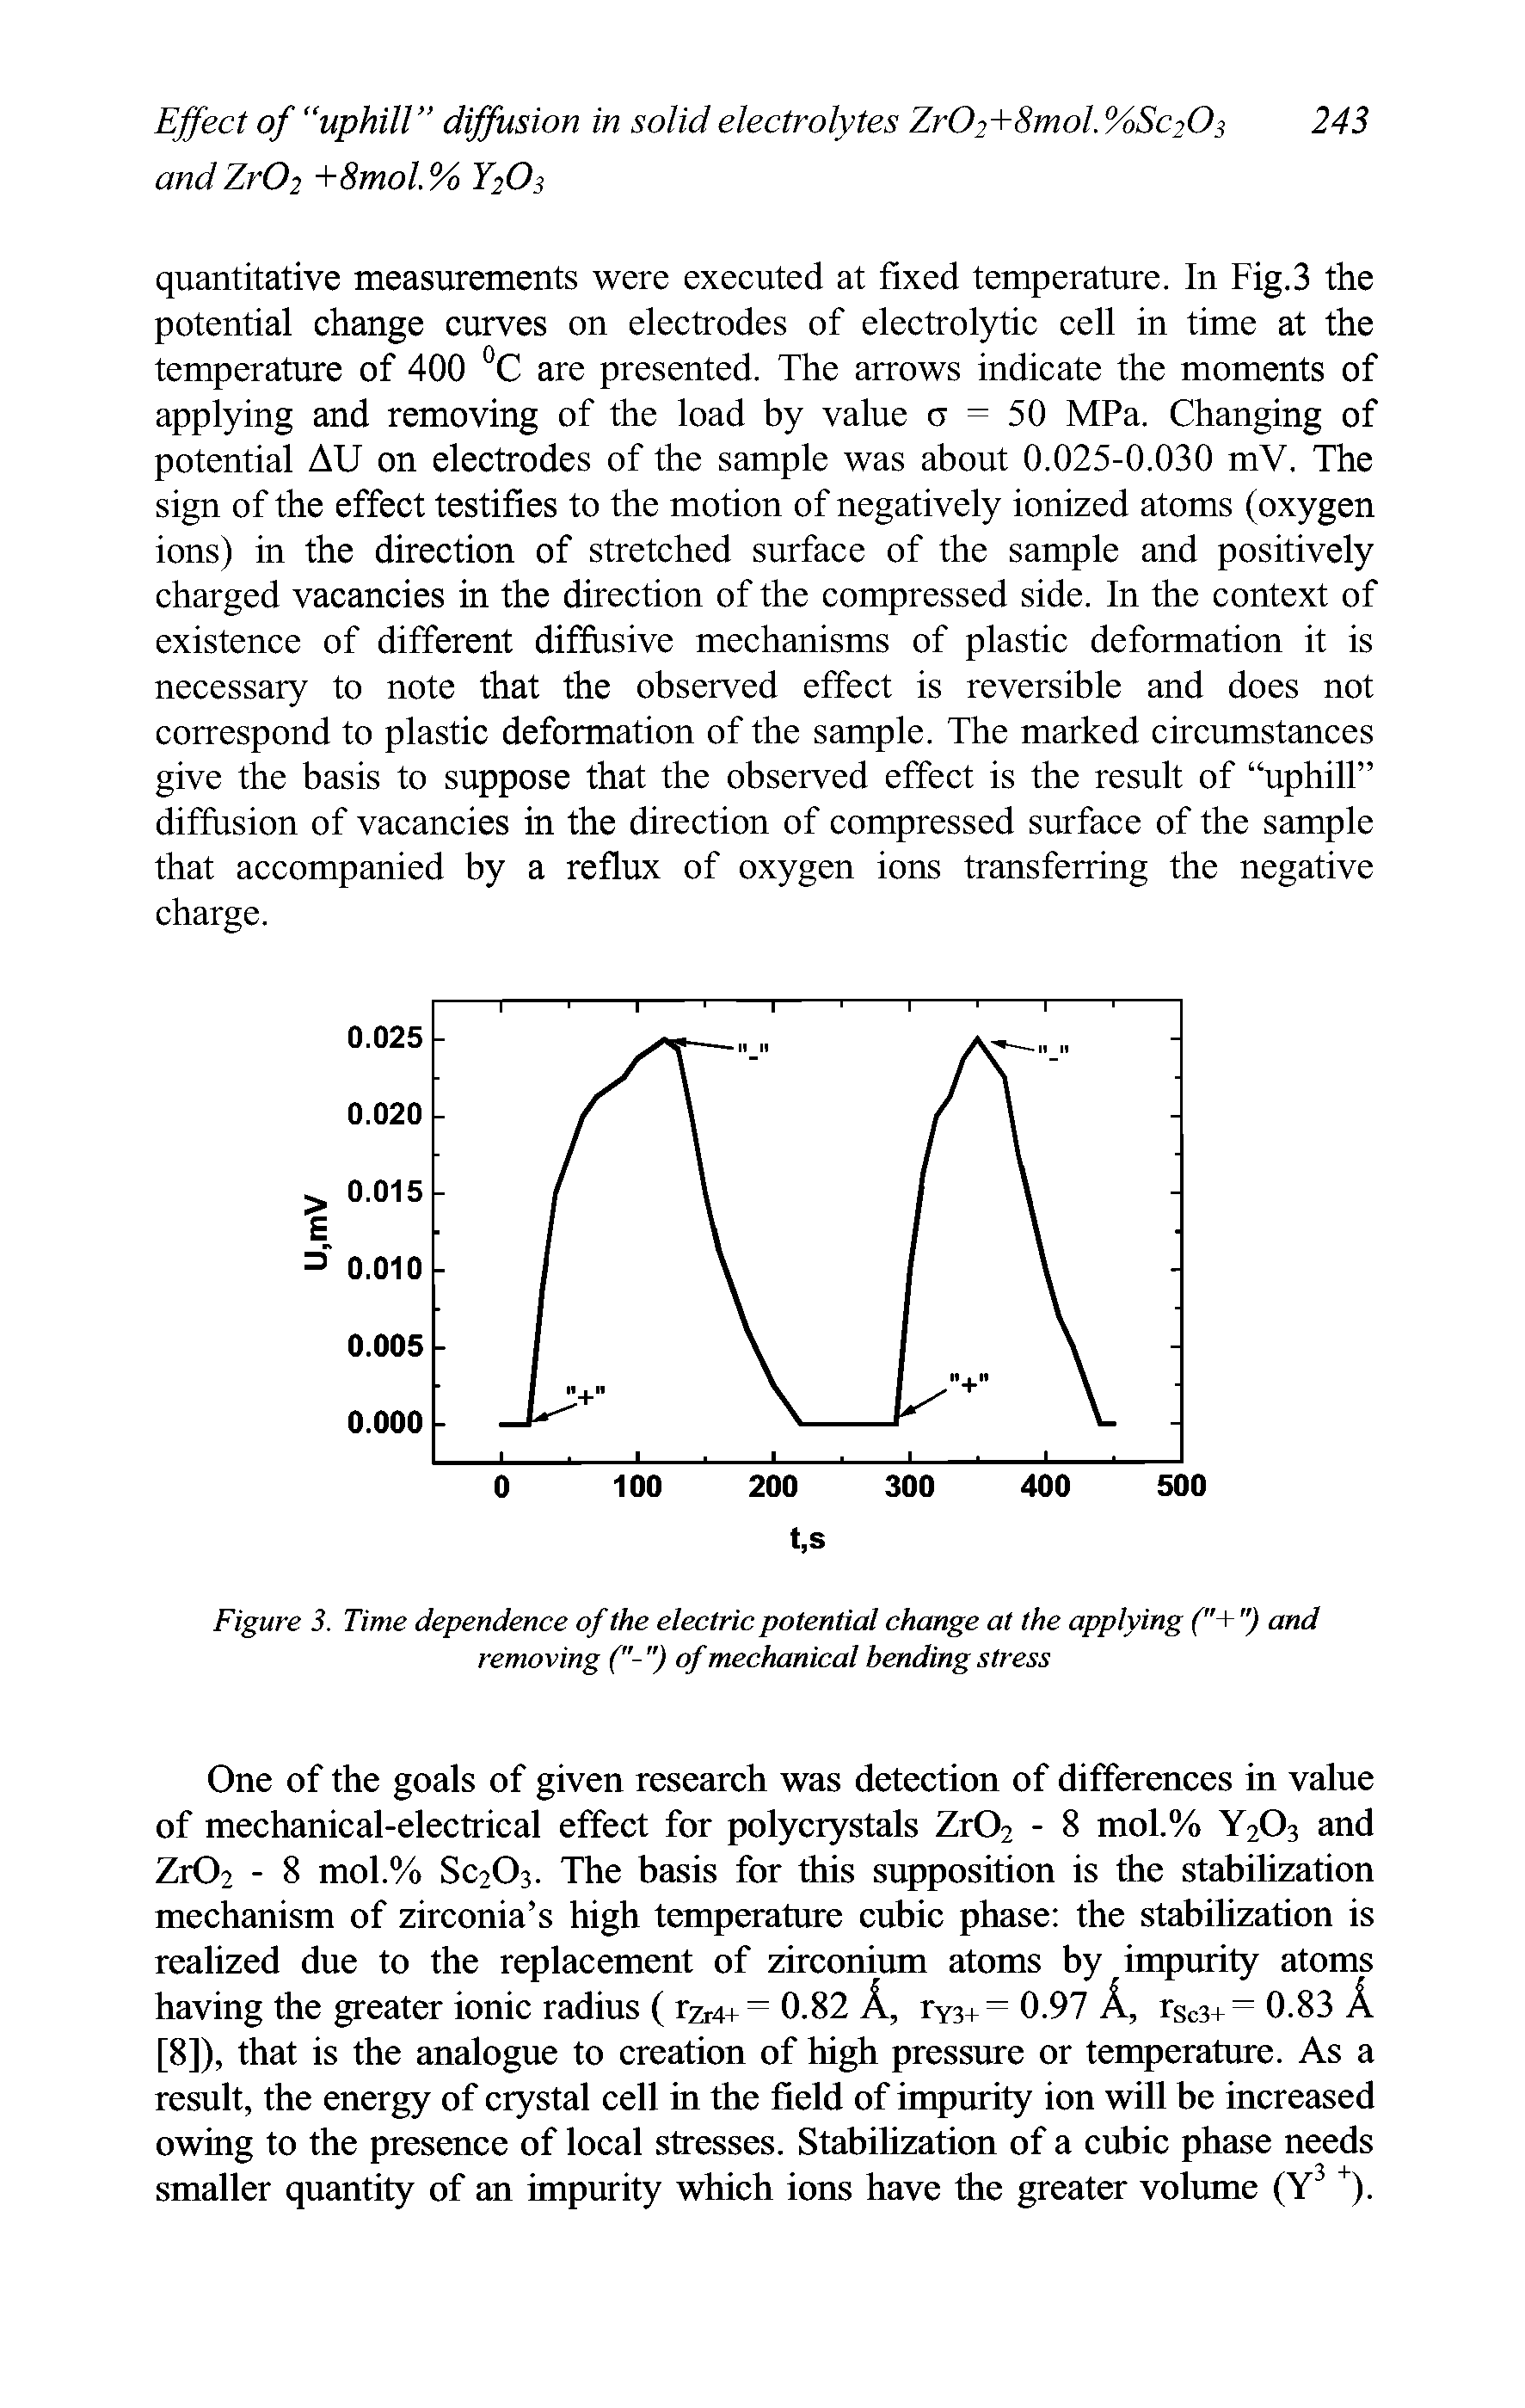 Figure 3. Time dependence of the electric potential change at the applying ("+ ") and removing of mechanical bending stress...